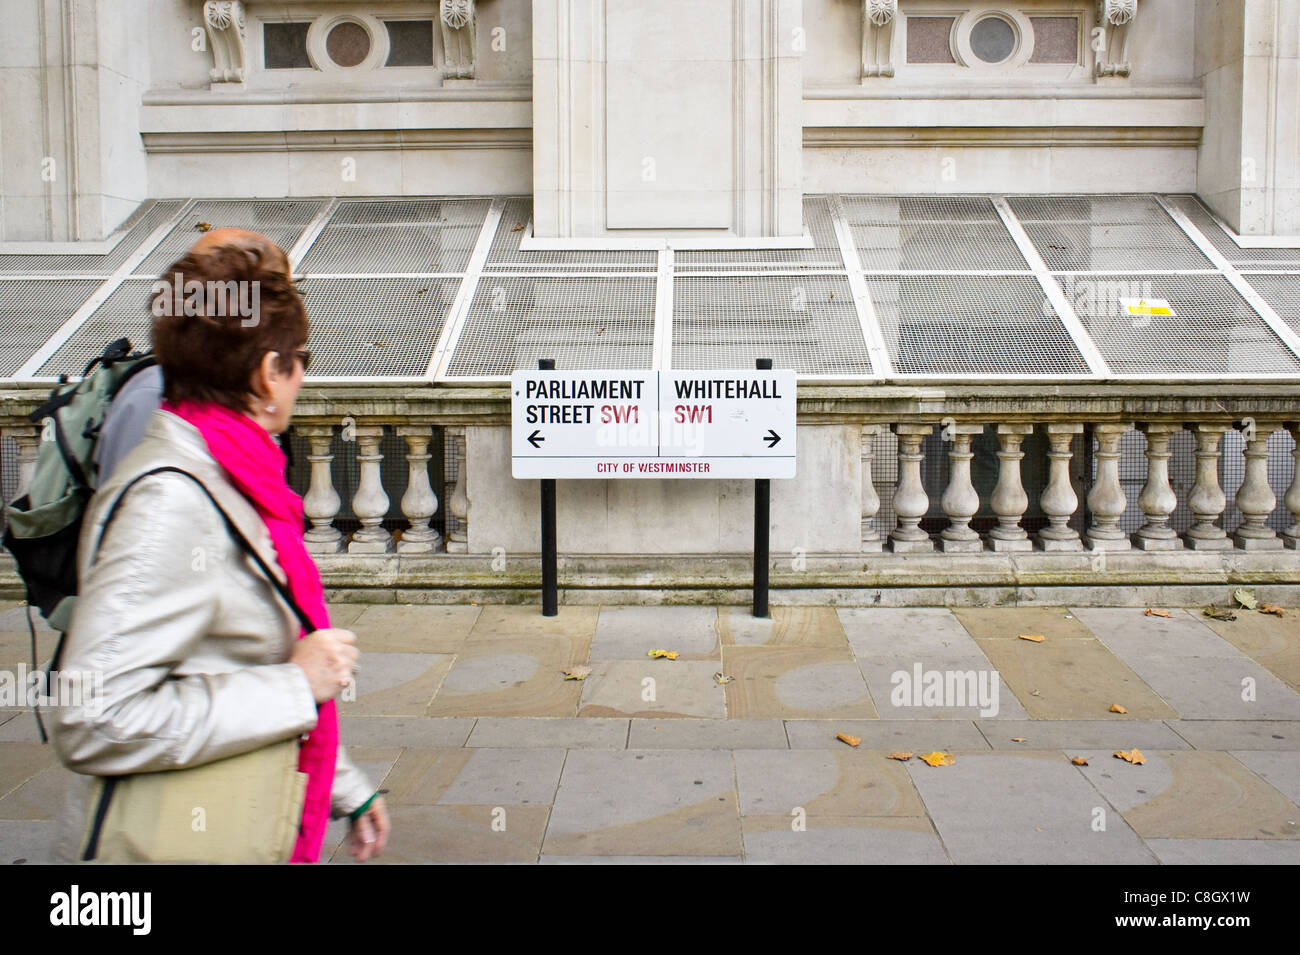 Whitehall-Parliament Street sign with pedestrians, London 2011 Stock Photo